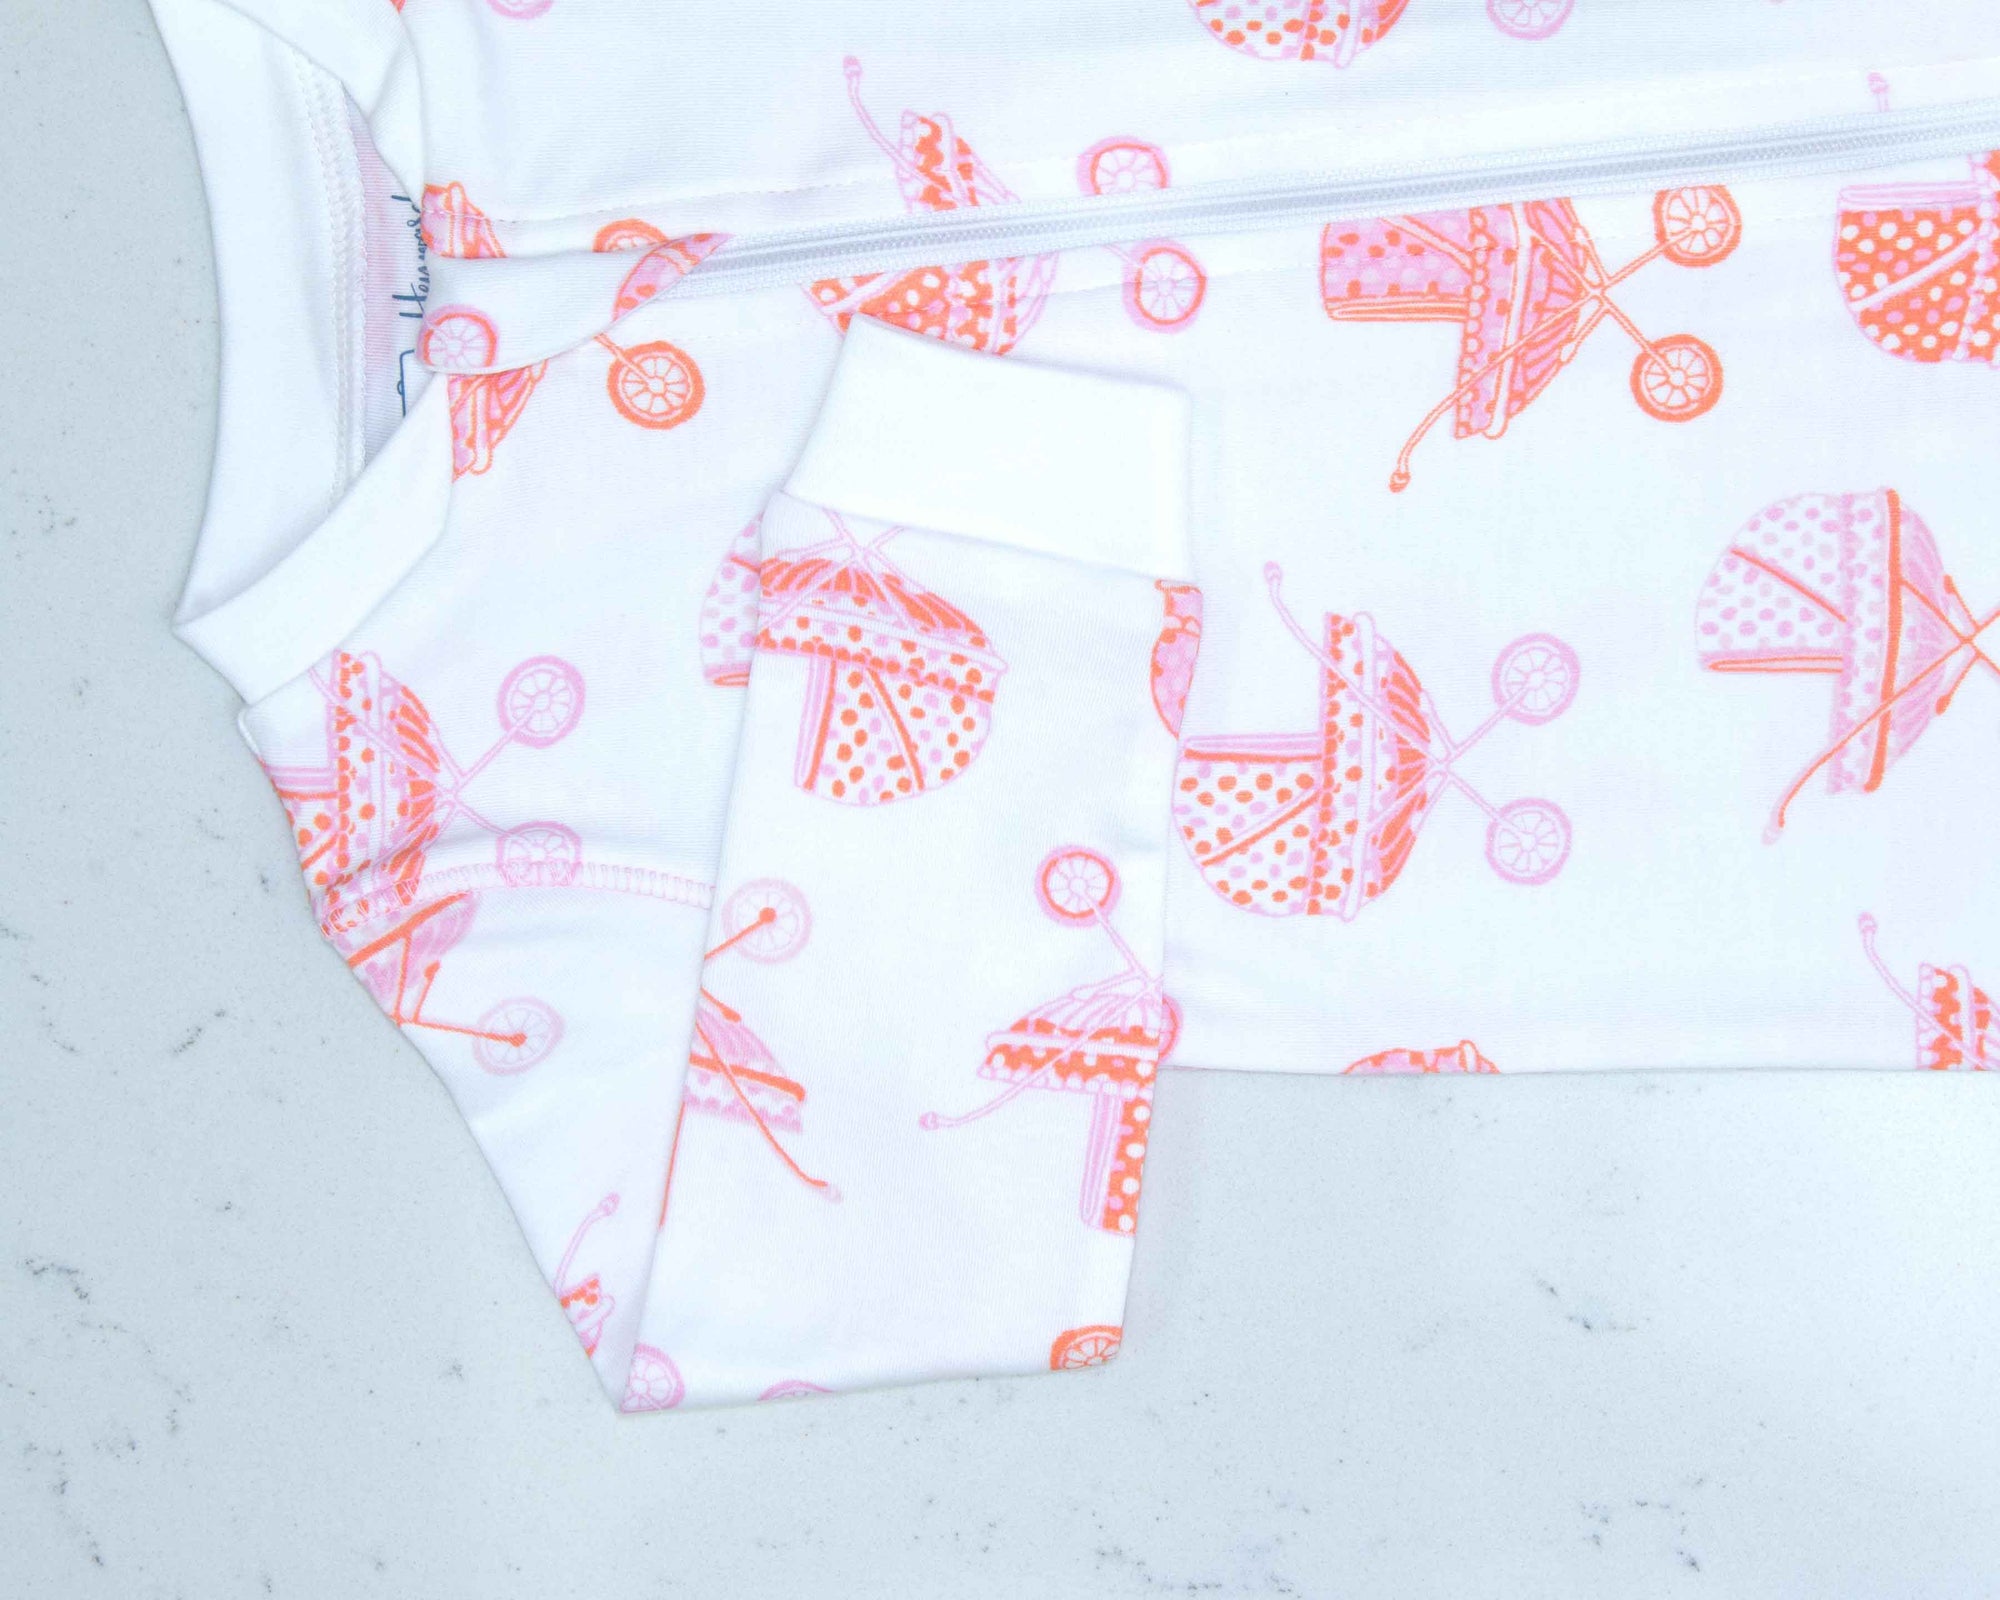 Detail of zipper area of white footed pajama with vintage baby carriage pattern made in pima cotton